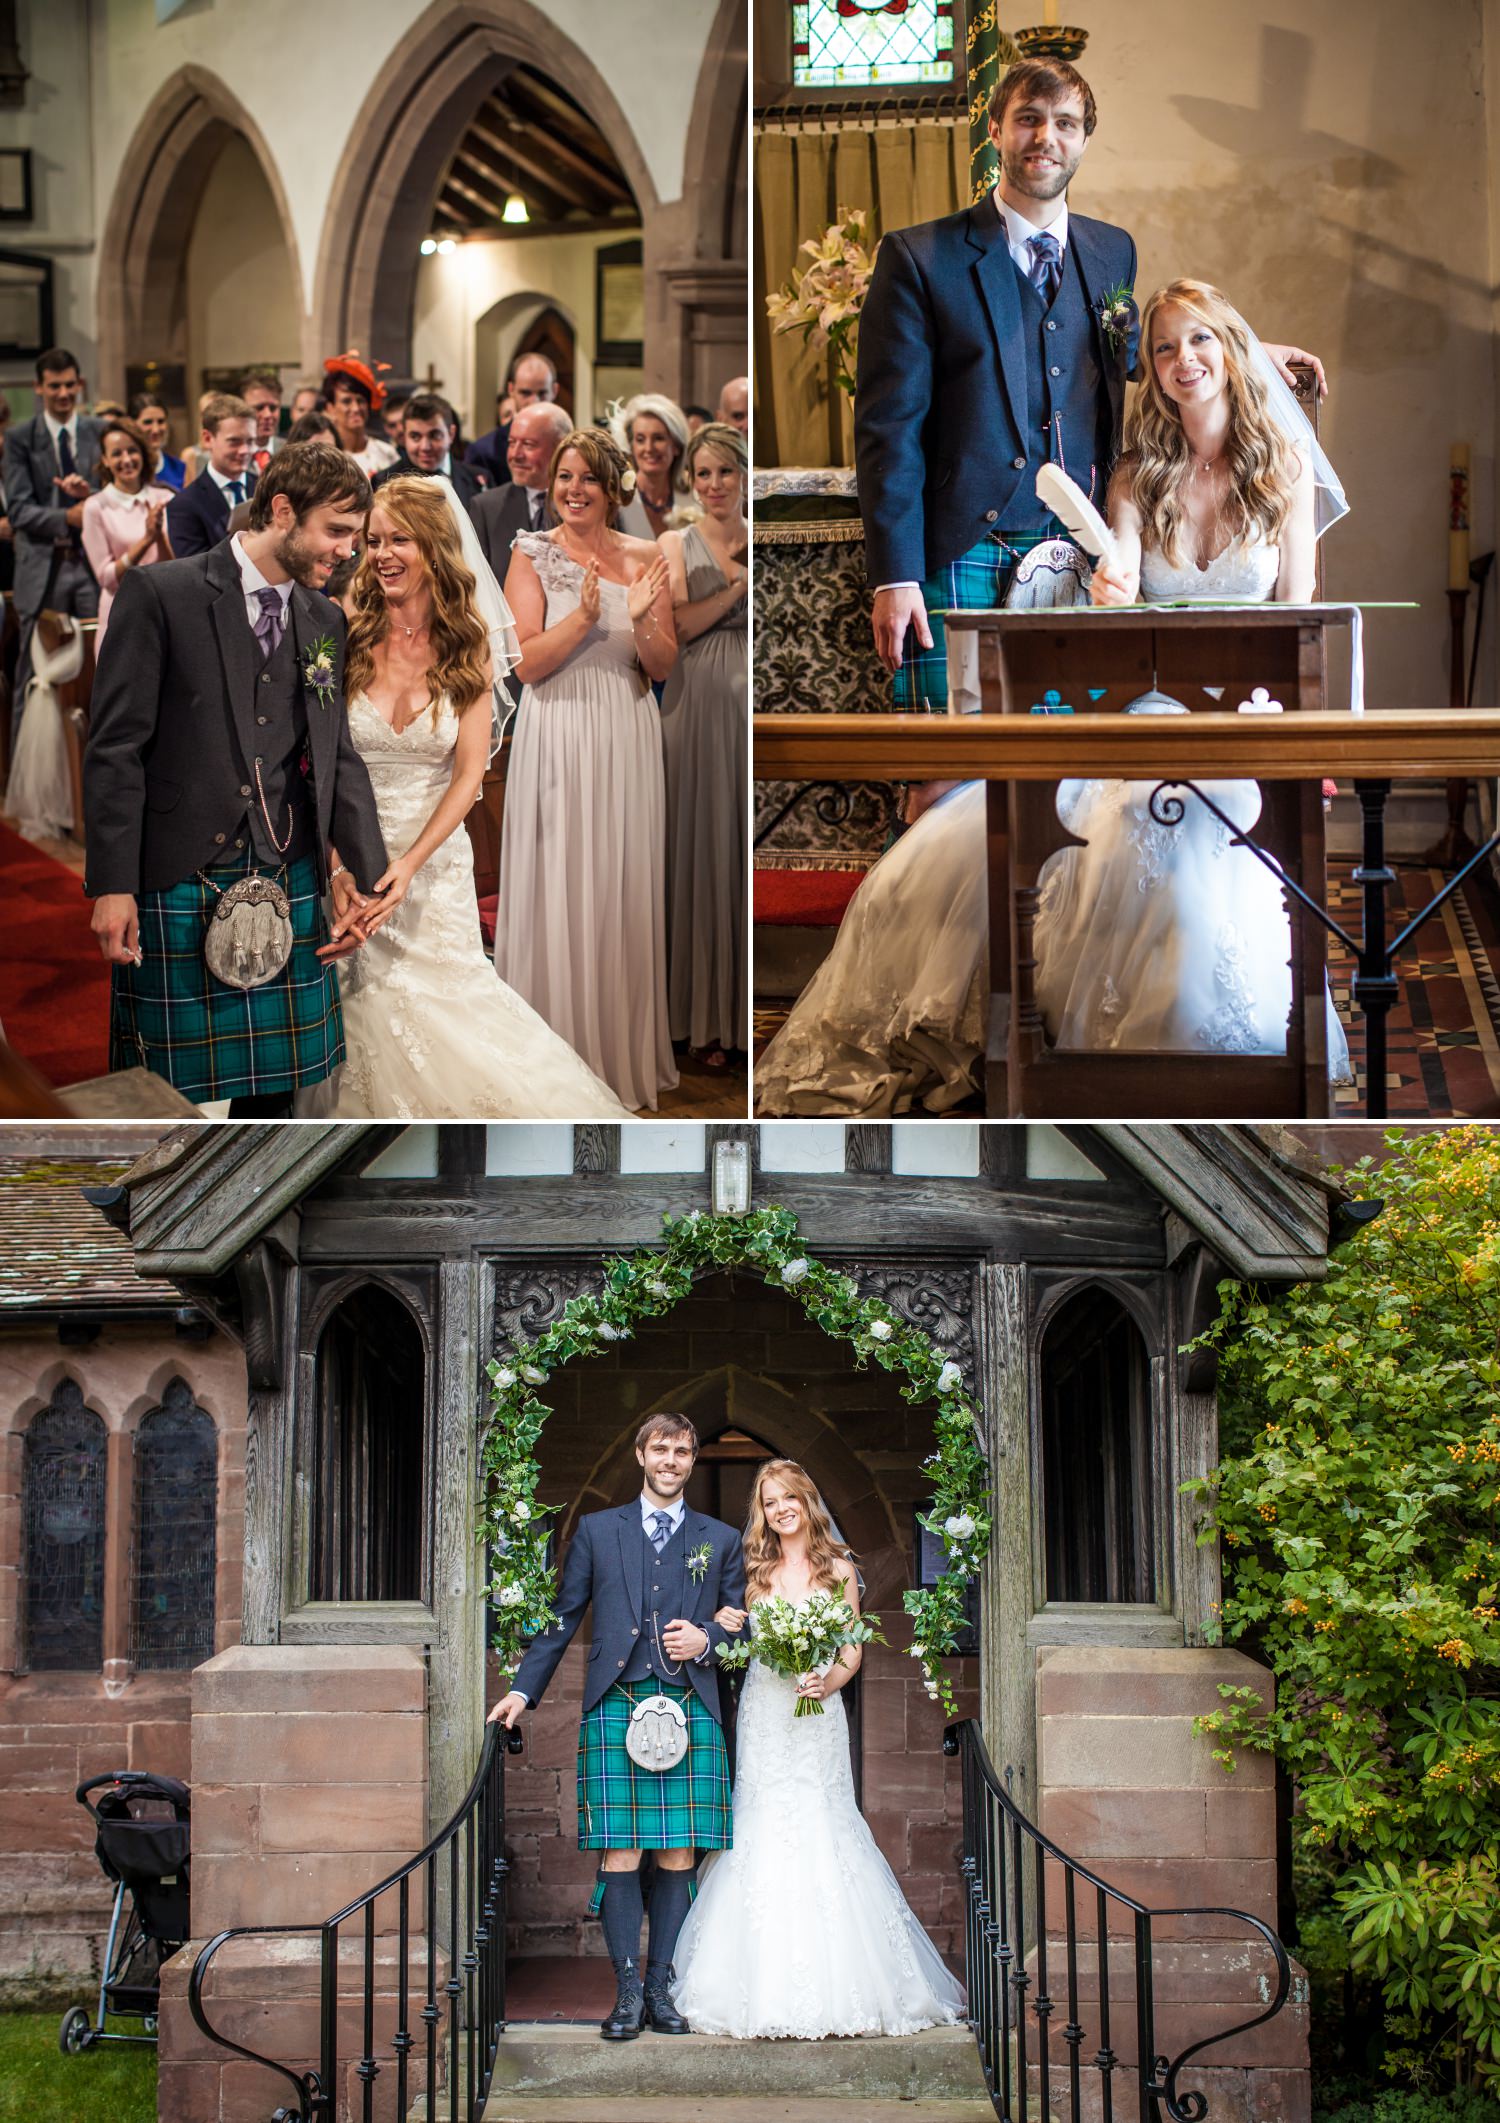 Wedding photography of the wedding ceremony at Hundred House Hotel